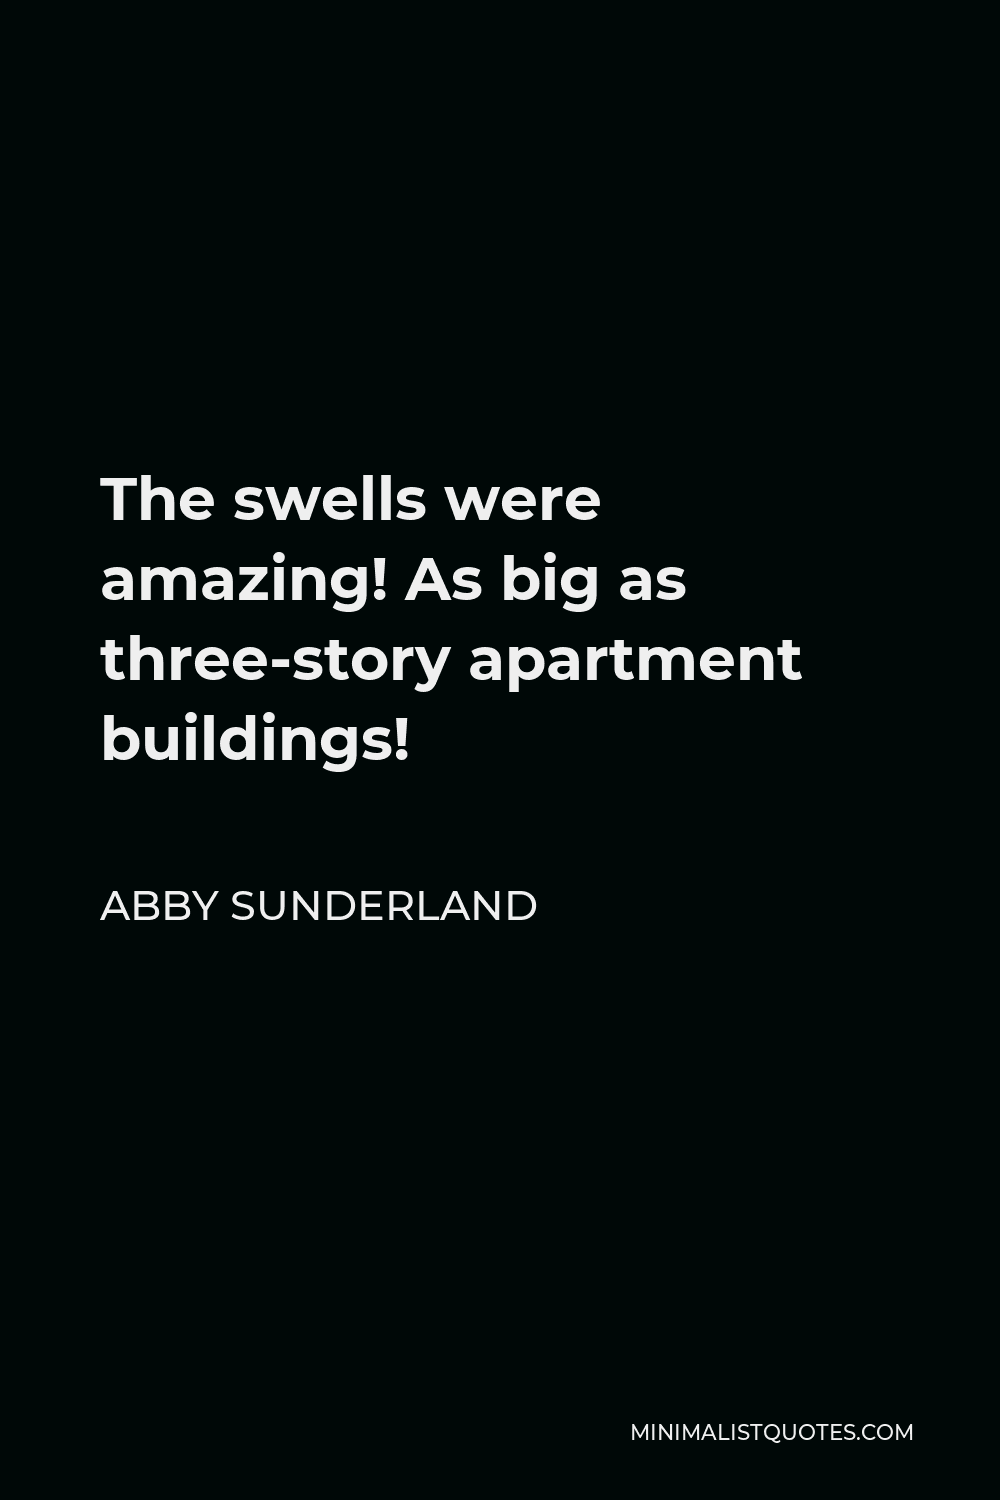 Abby Sunderland Quote - The swells were amazing! As big as three-story apartment buildings!